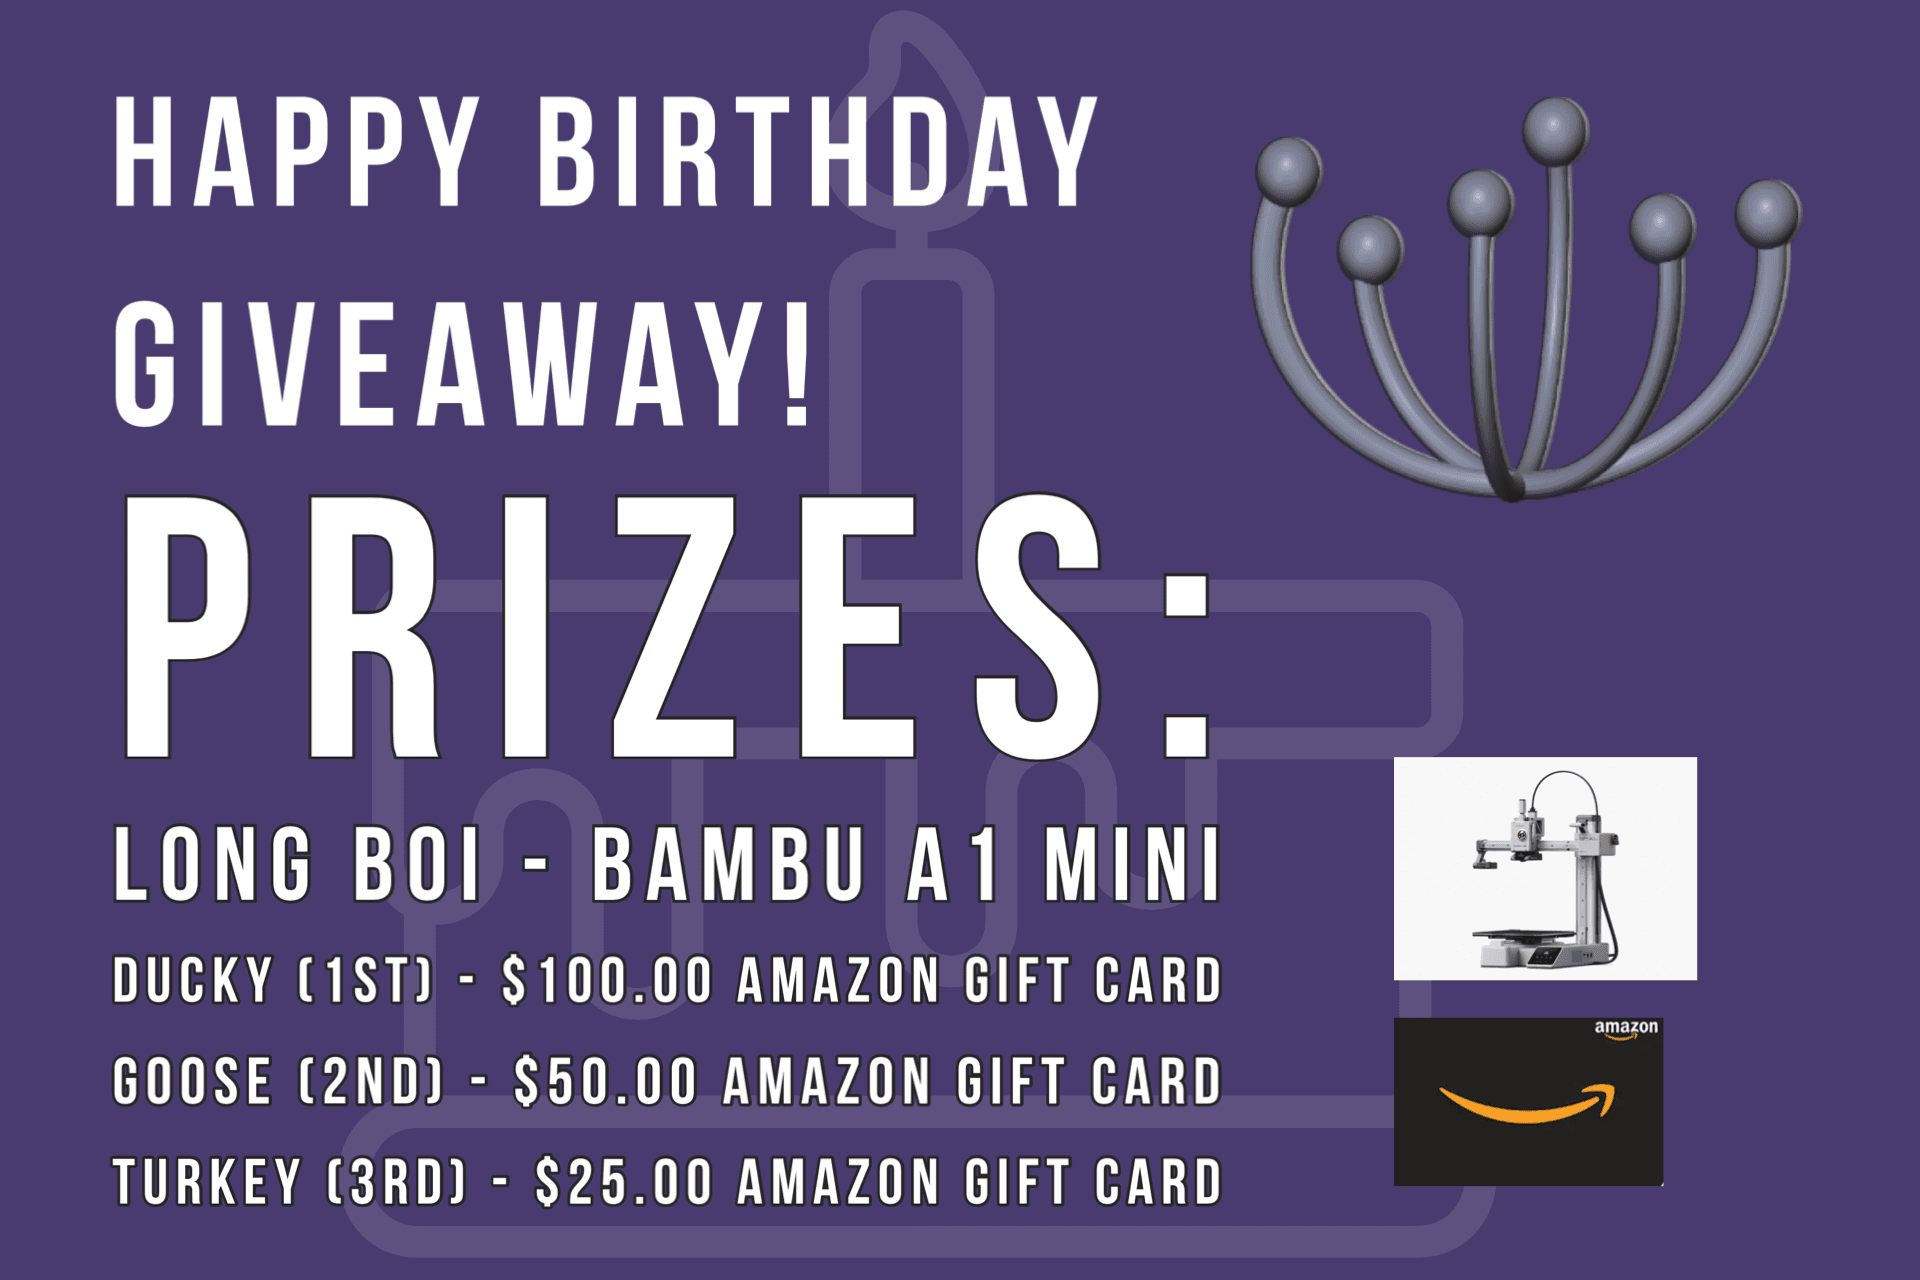 M3D turns ONE - Happy Birthday Giveaway & Discount Code!